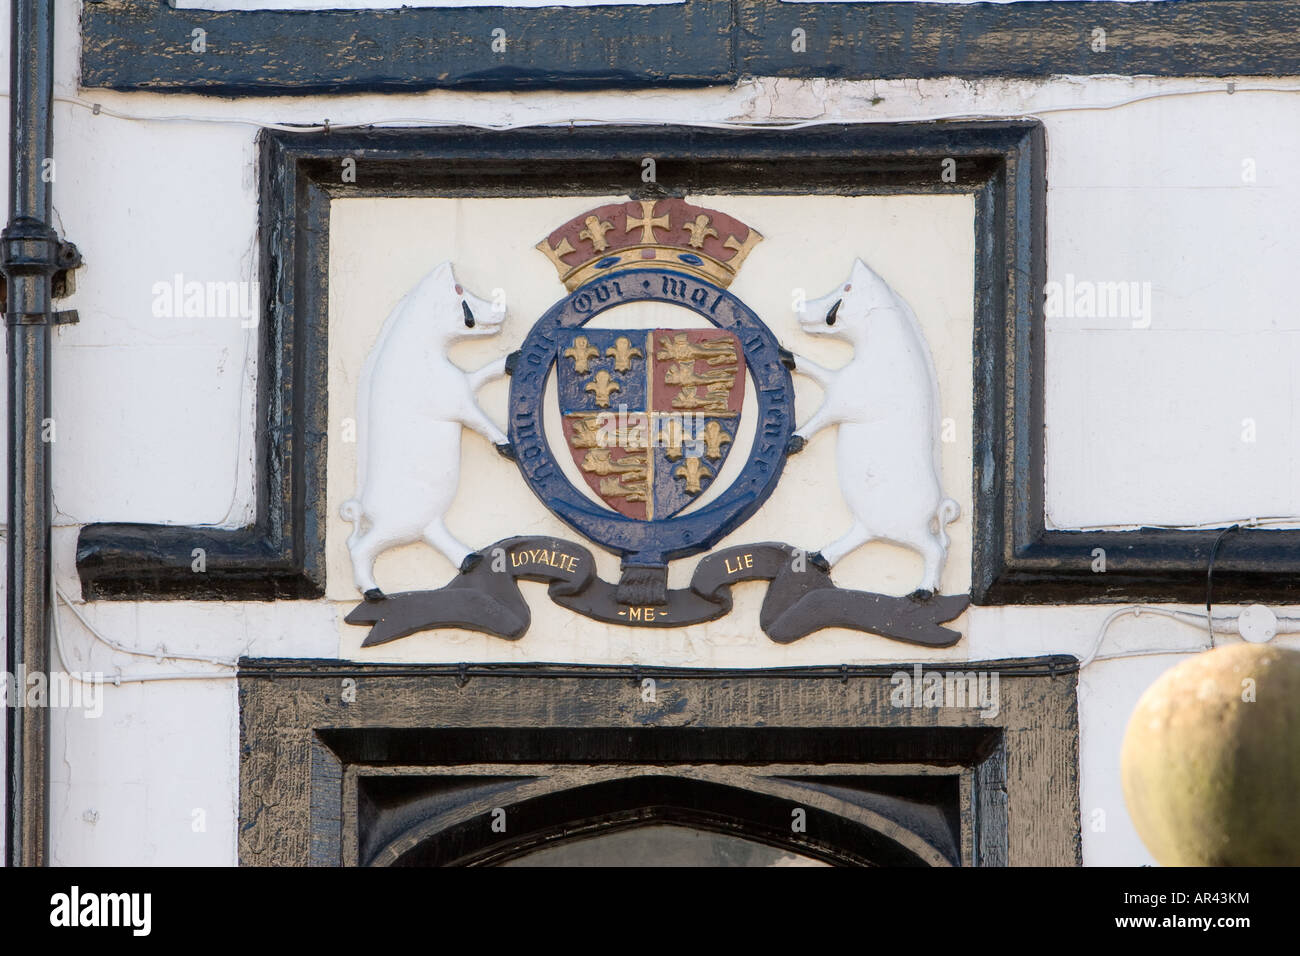 Seal on a building in Penrith England that says Loyalte Me Lie or Loyalty binds me the motto of Richard III 12 10 2007 Stock Photo